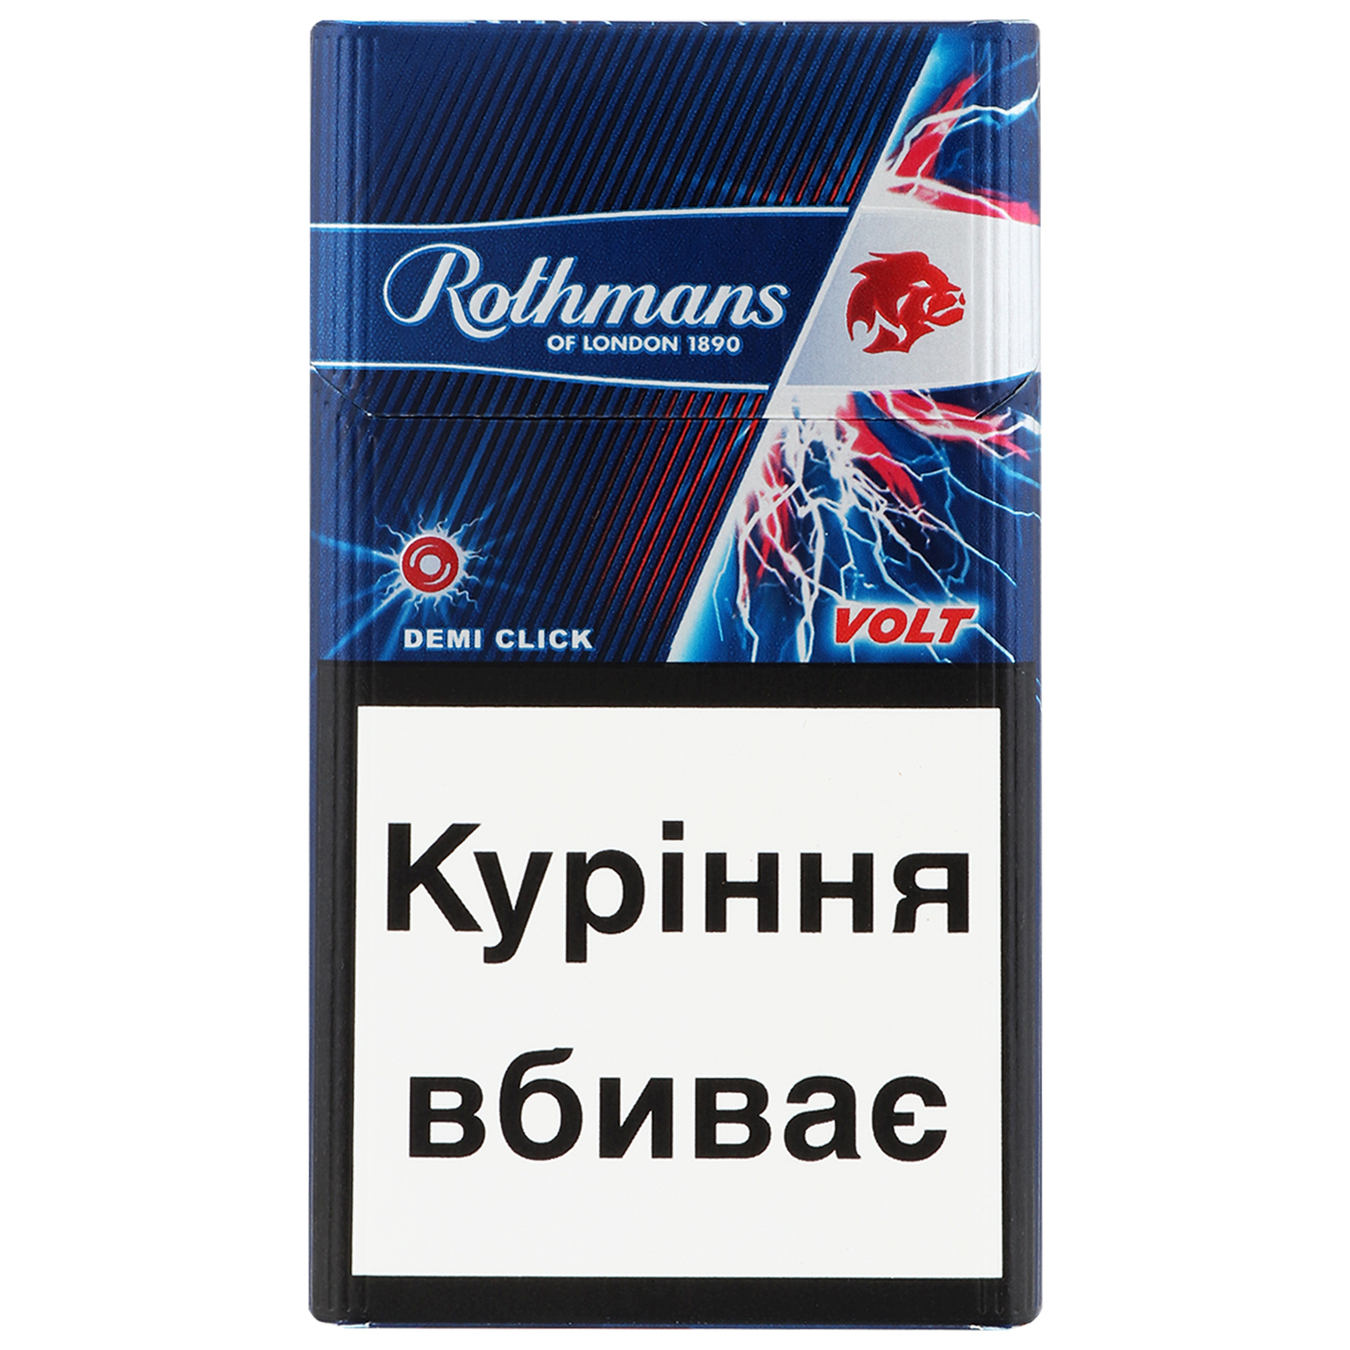 Cigarettes Rothmans Demi Click Volt 20pcs (the price is without excise tax)